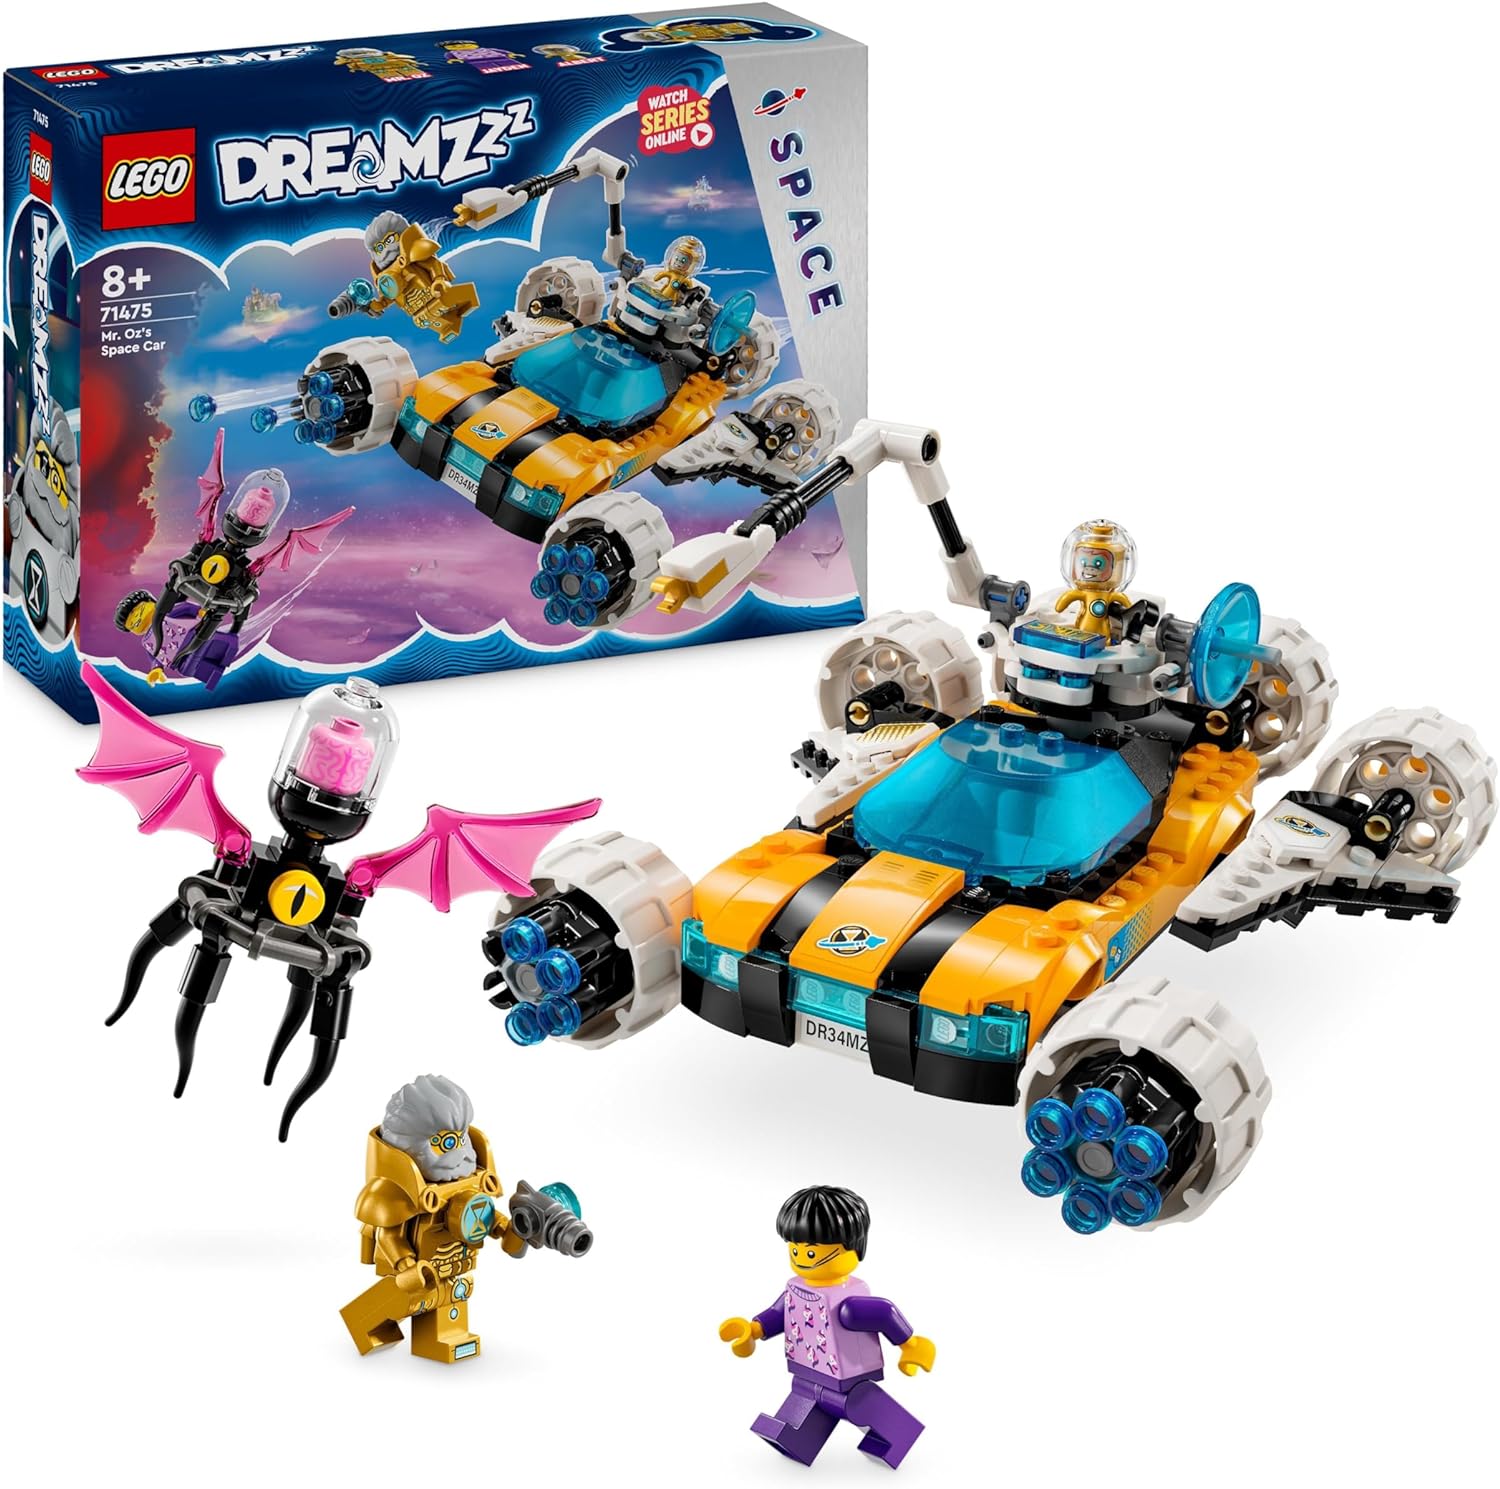 LEGO Dreamzzz The Space Buggy by Mr. Oz Set with Toy Car or Space Shuttle, Includes Mini Figures Mr. Oz, Albert and Jayden, Space Gift for Boys and Girls from 8 Years 71475